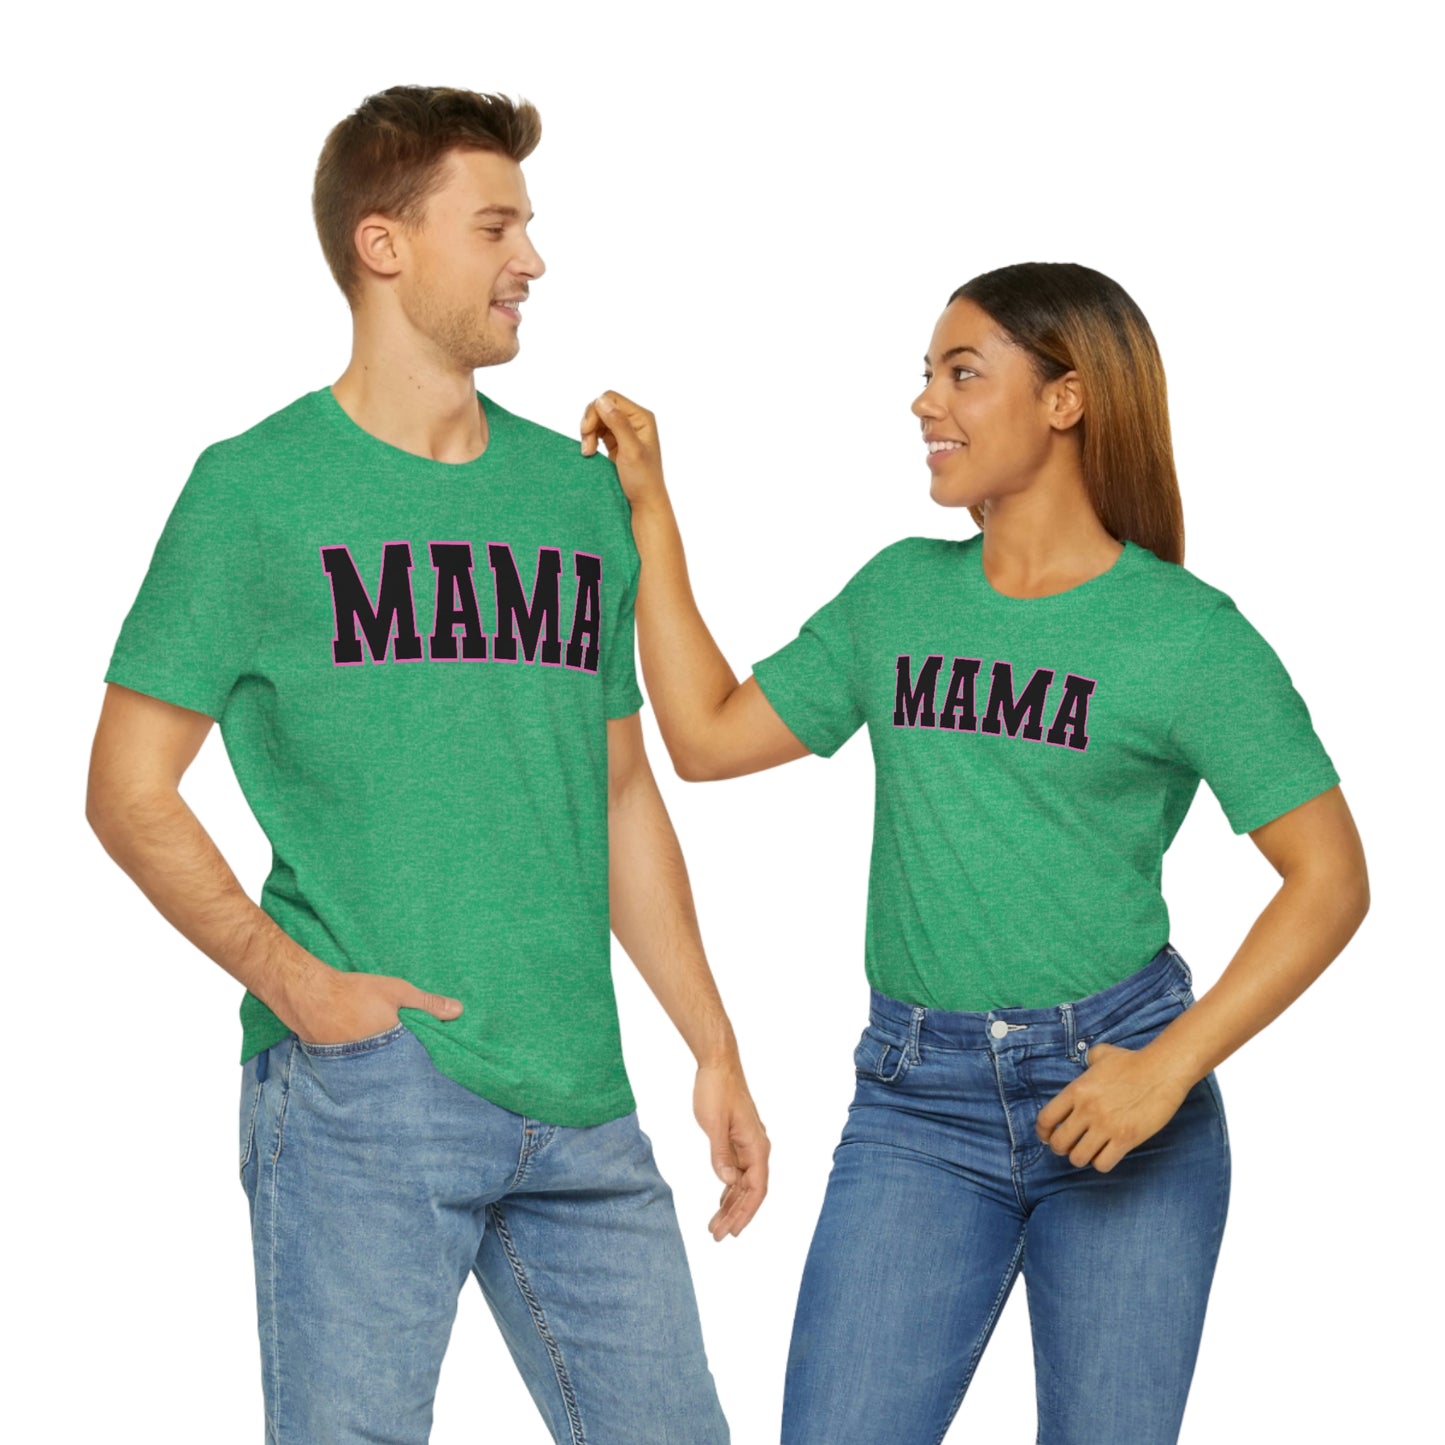 Cute Mama shirt mom shirt gift for her - mothers day shirt mothers day gift mom life shirt - retro mama shirt boy mama shirt mama t-shirt